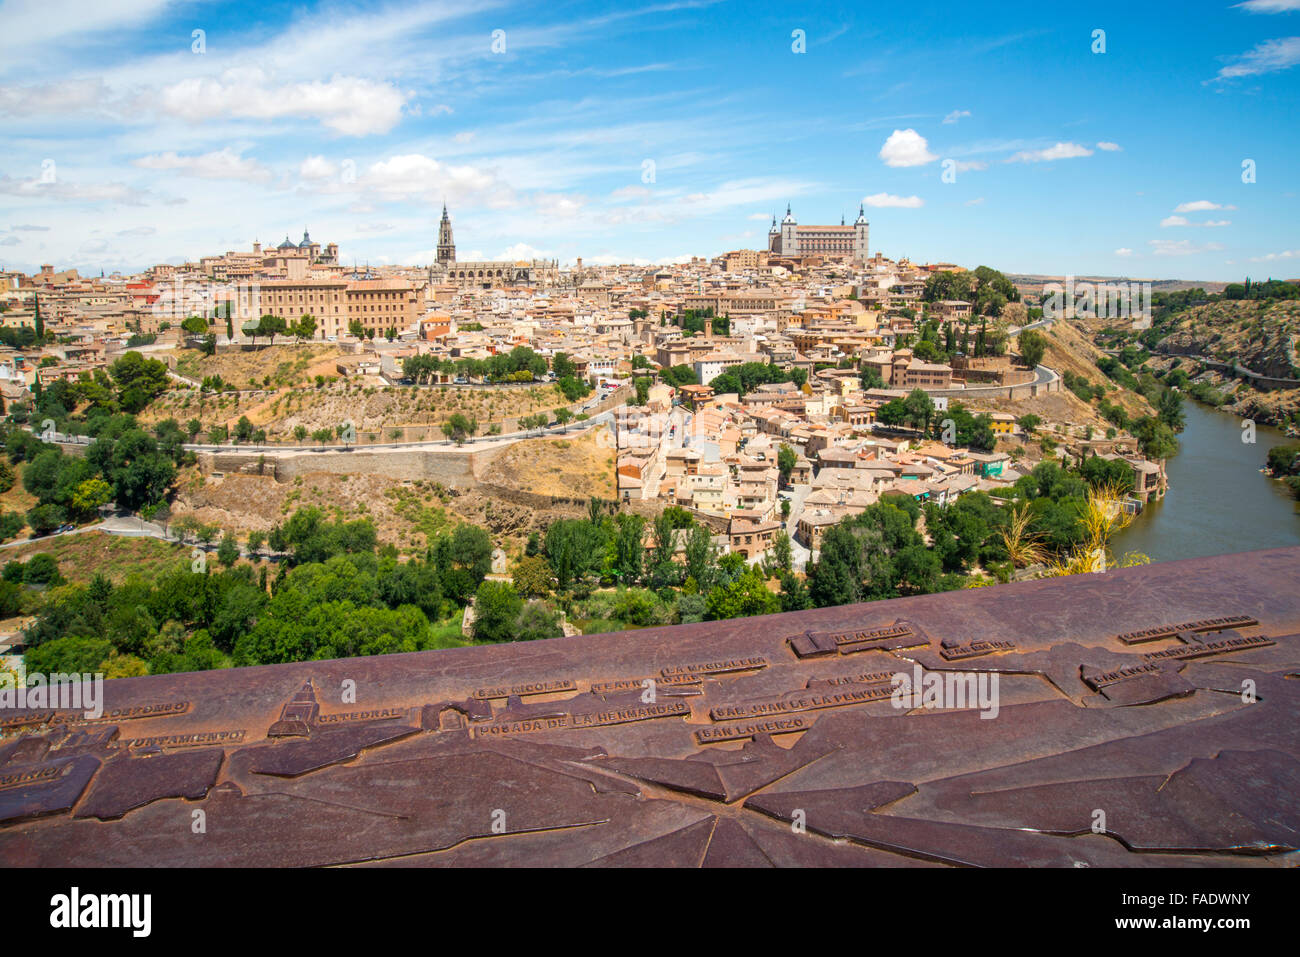 Overview from the viewpoint and map of the town. Toledo, Spain. Stock Photo